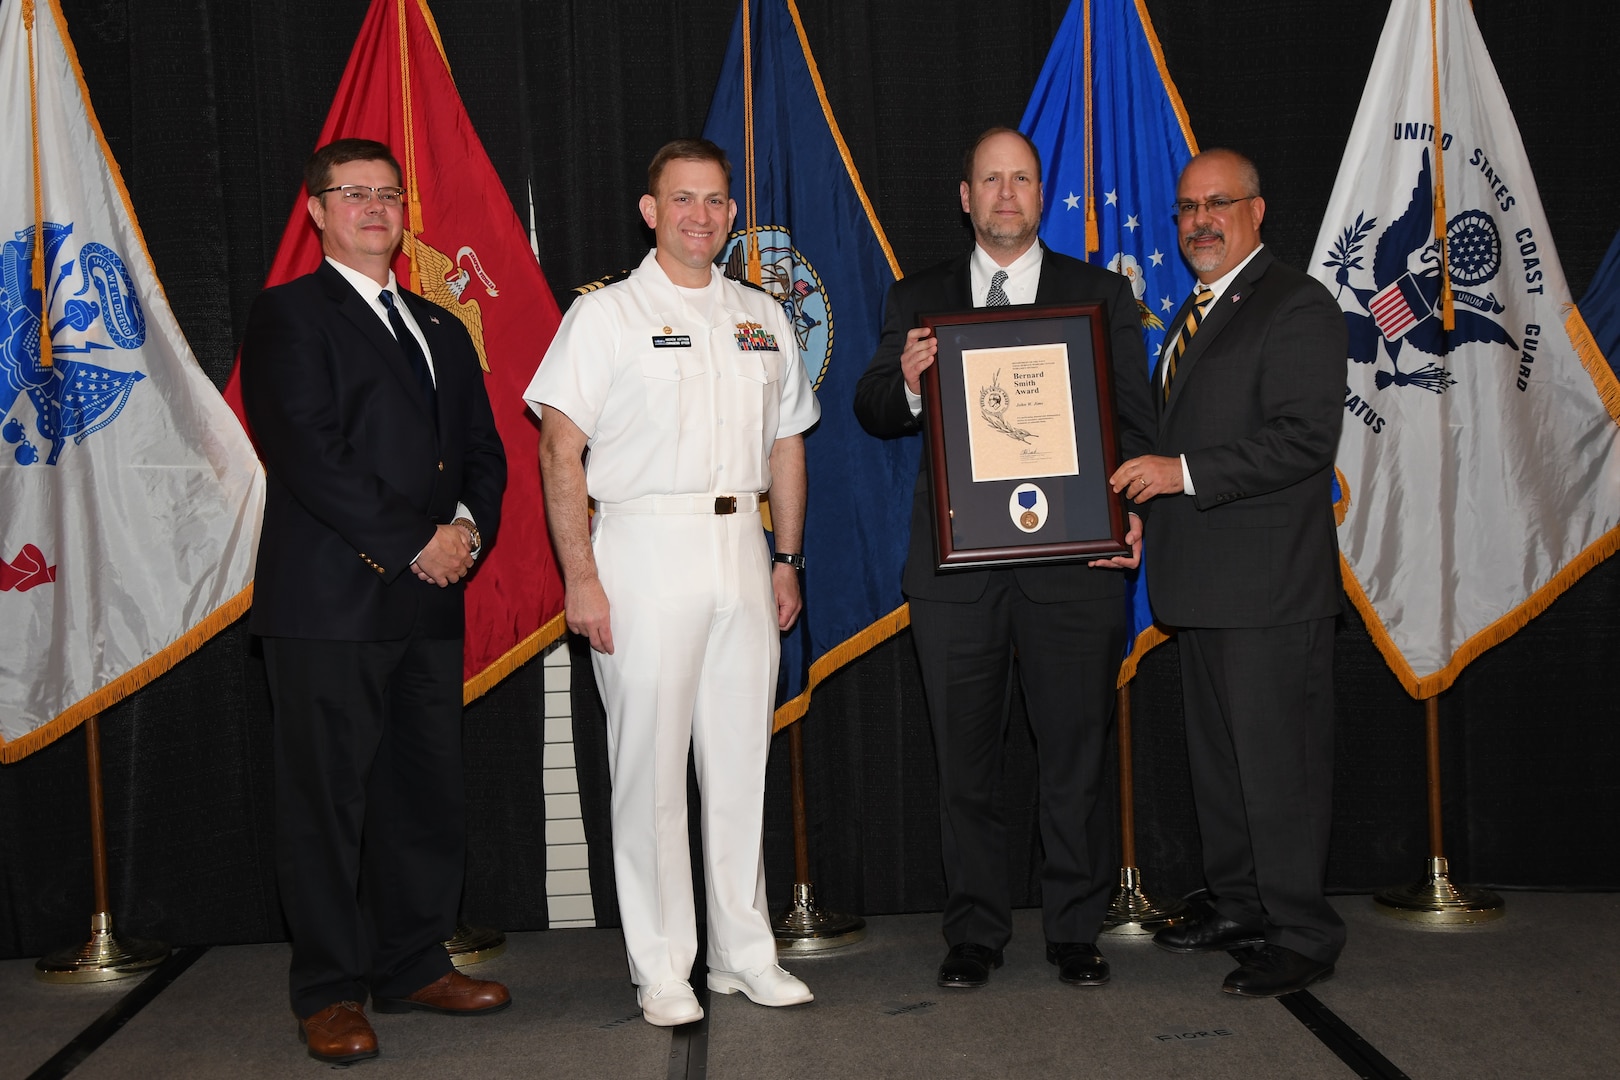 IMAGE: John Jims is presented the Bernard Smith Award at Naval Surface Warfare Center Dahlgren Division's annual awards ceremony, Apr. 26 at the Fredericksburg Expo and Conference Center.